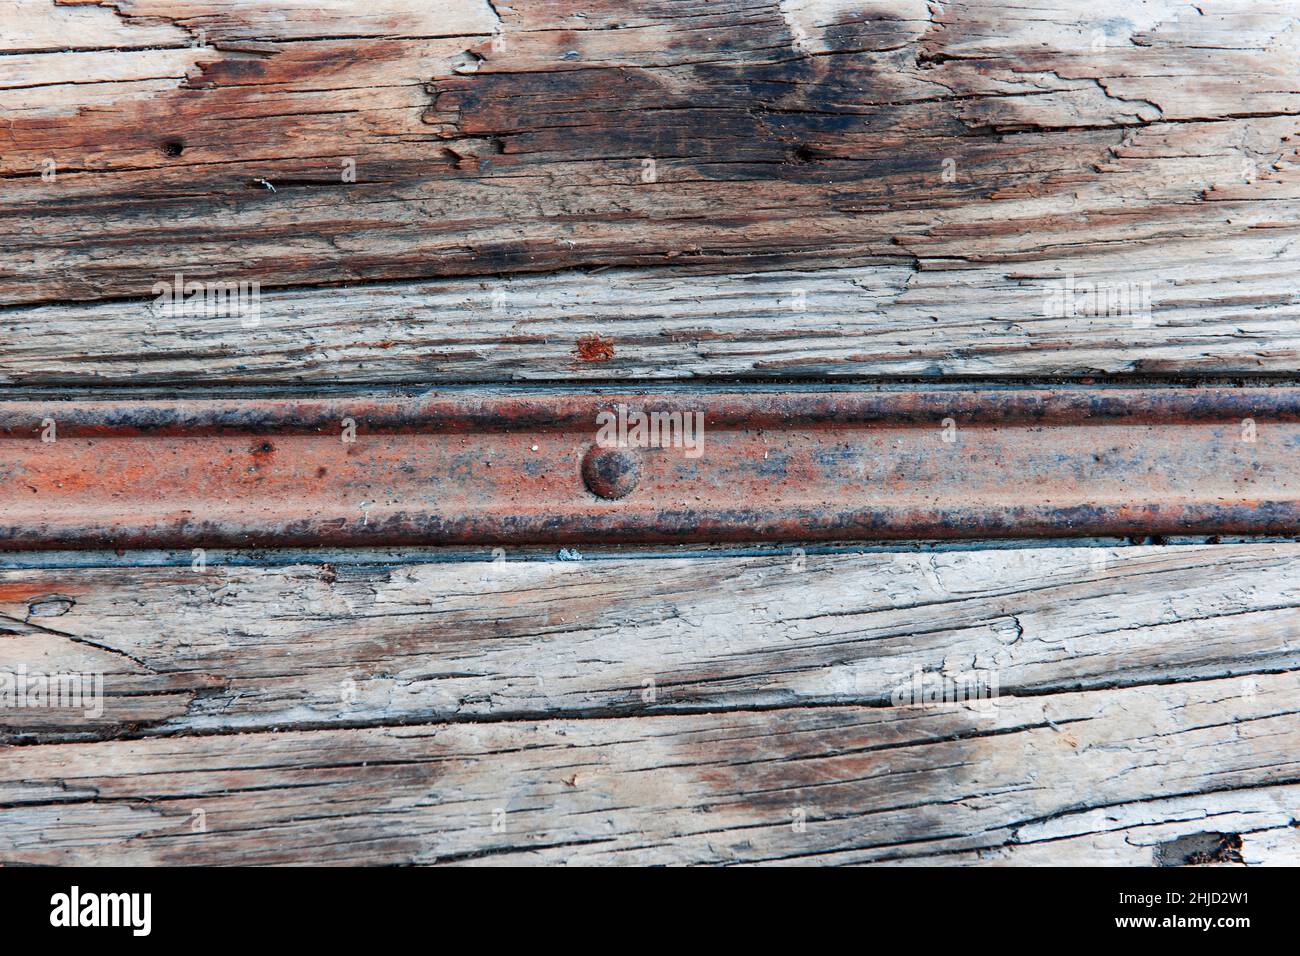 Full-frame view of a rusty metal rail in weathered wood. Stock Photo